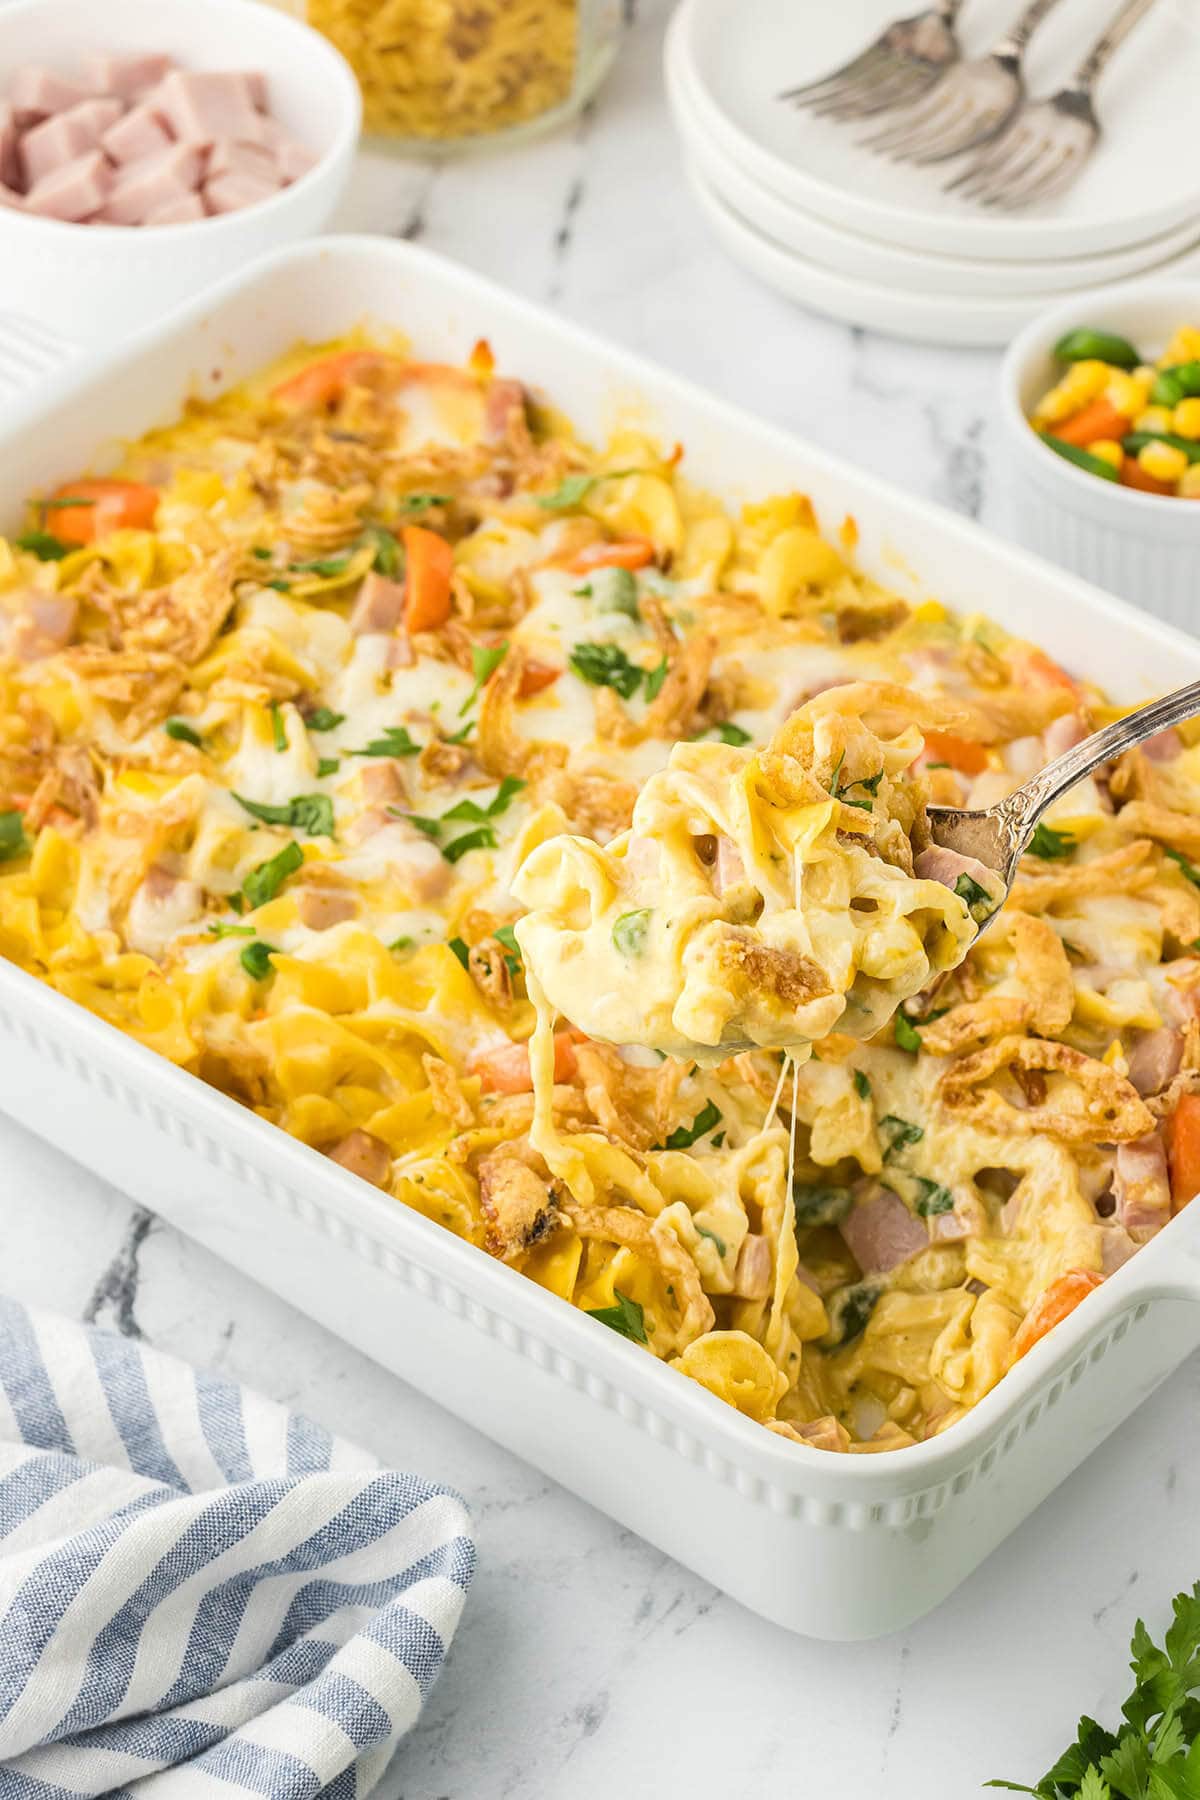 Casserole dish filled with ham and noodle bake. With a serving spoon.